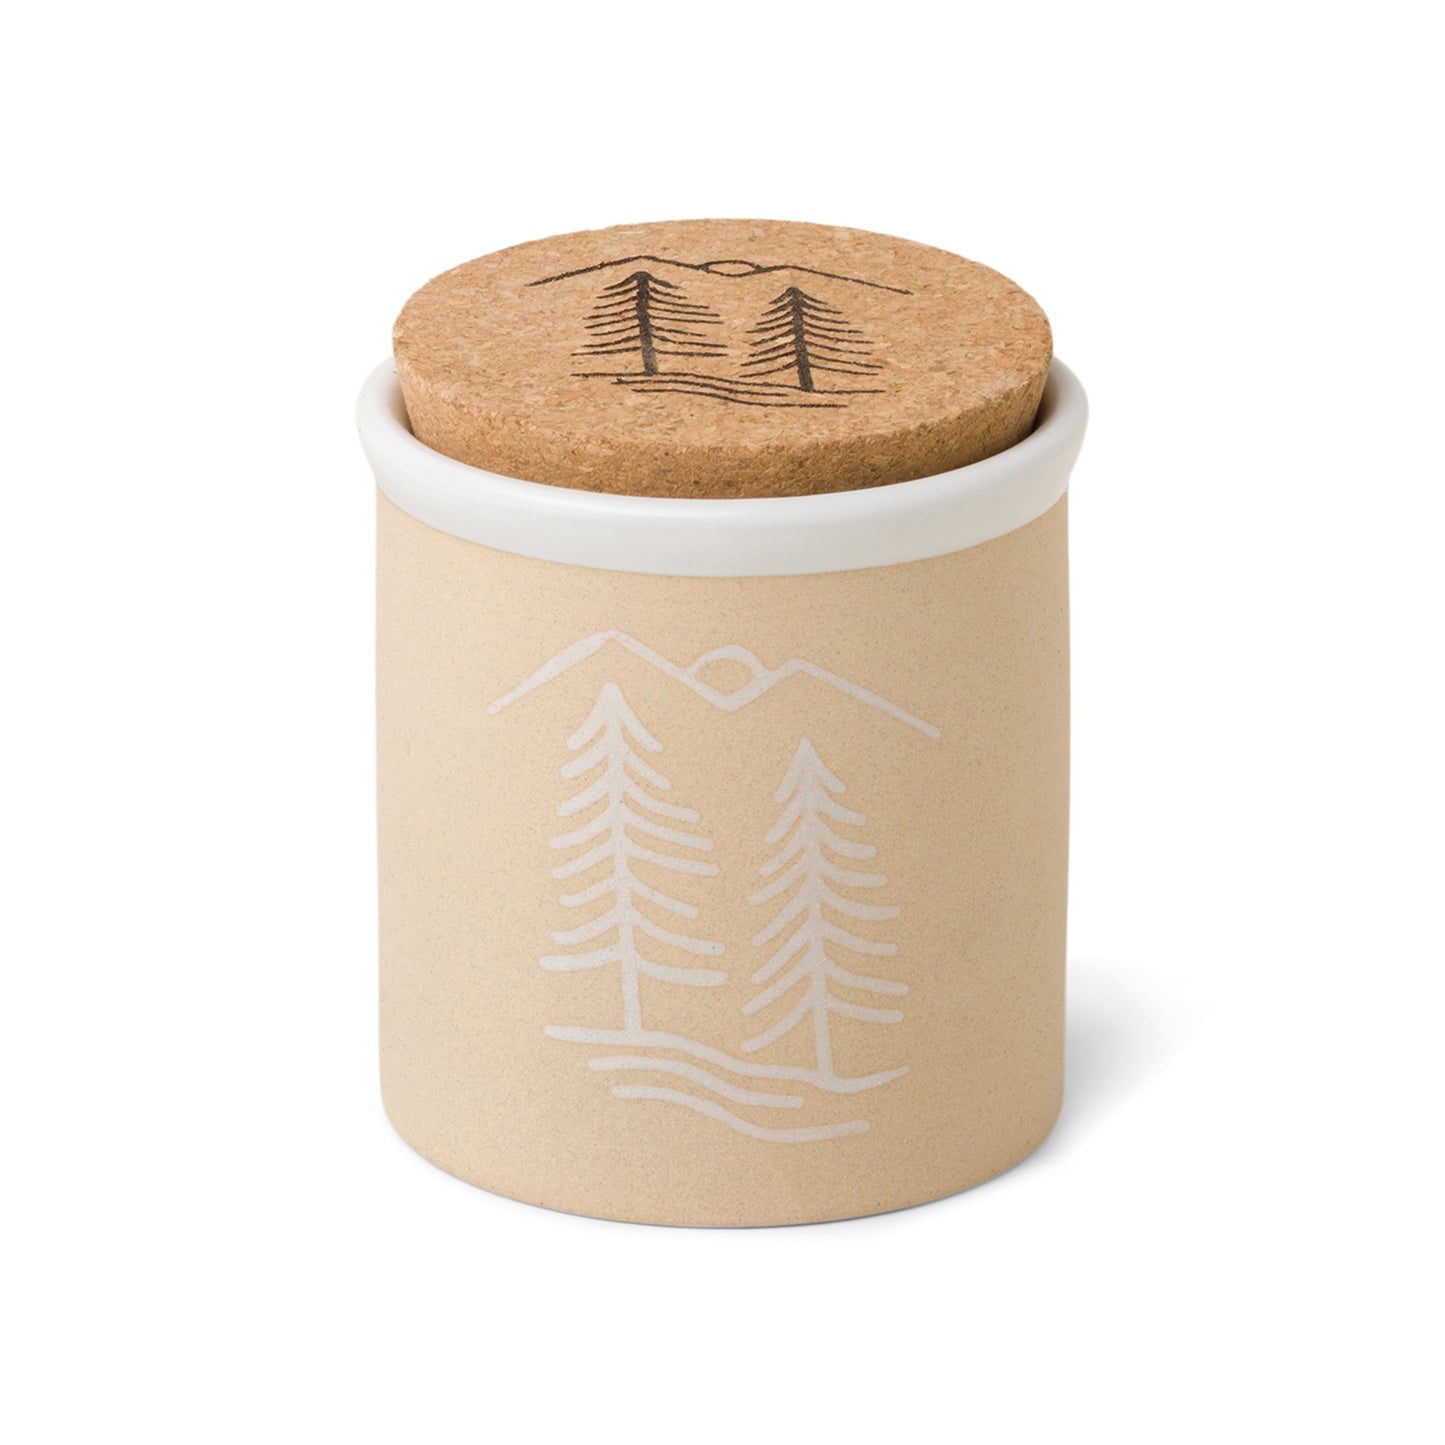 Cypress & Fir Holiday Candle